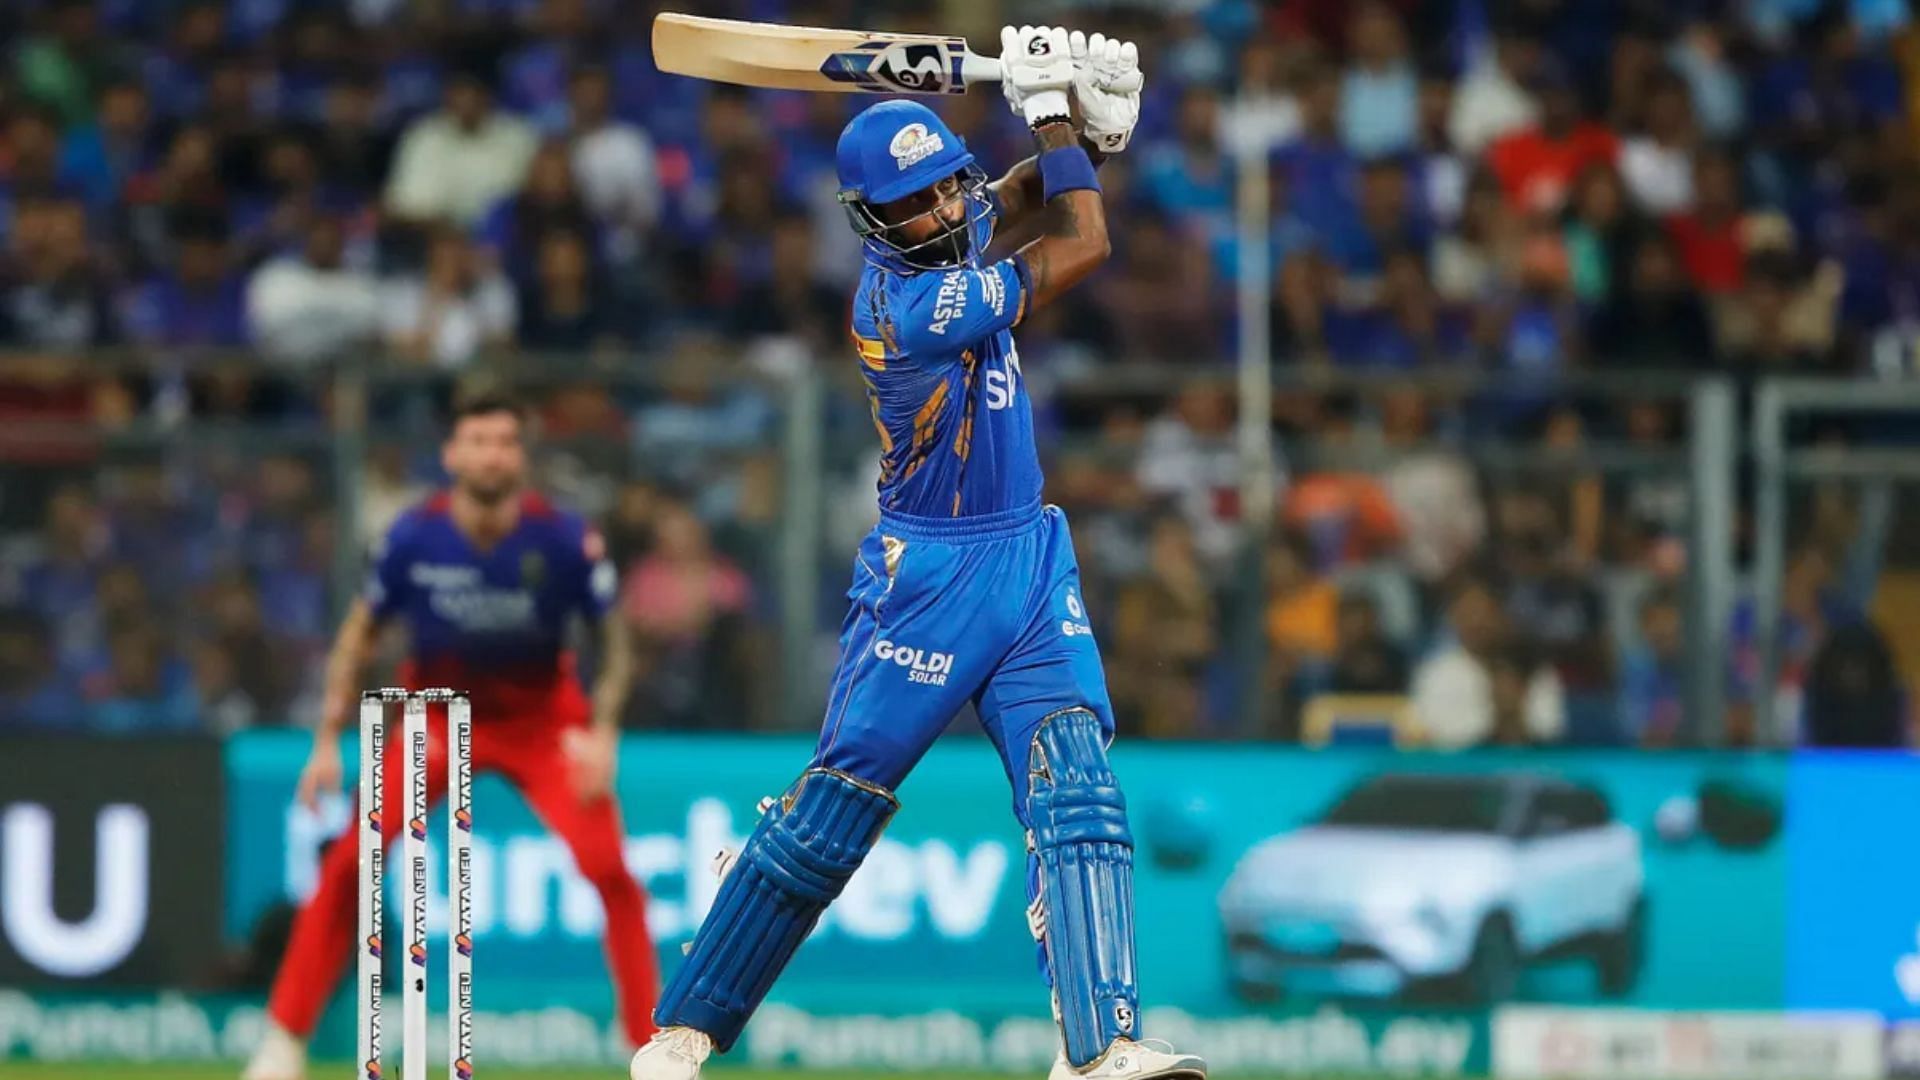 Hardik Pandya scored 21* off just 6 balls against RCB and took his team home.